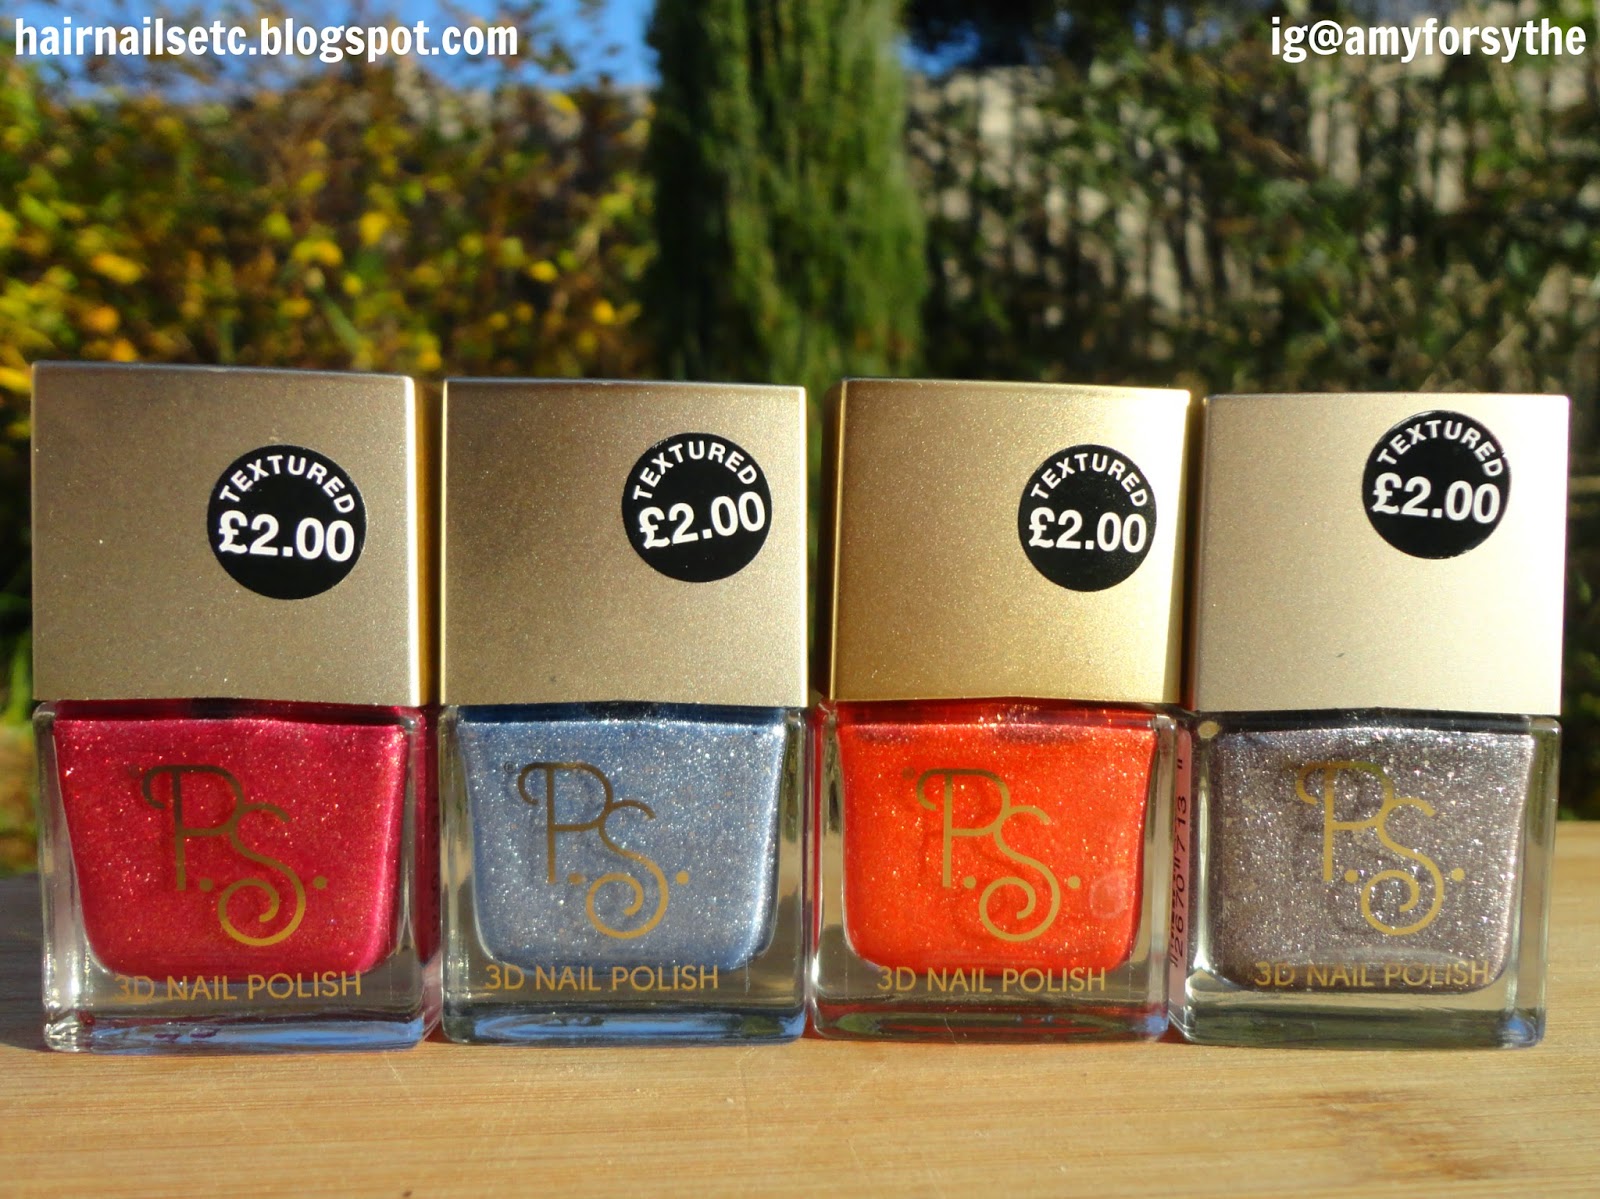 Primark PS 3D Texture Nail Polishes Swatches and Review Red Orange Grey Silver Blue